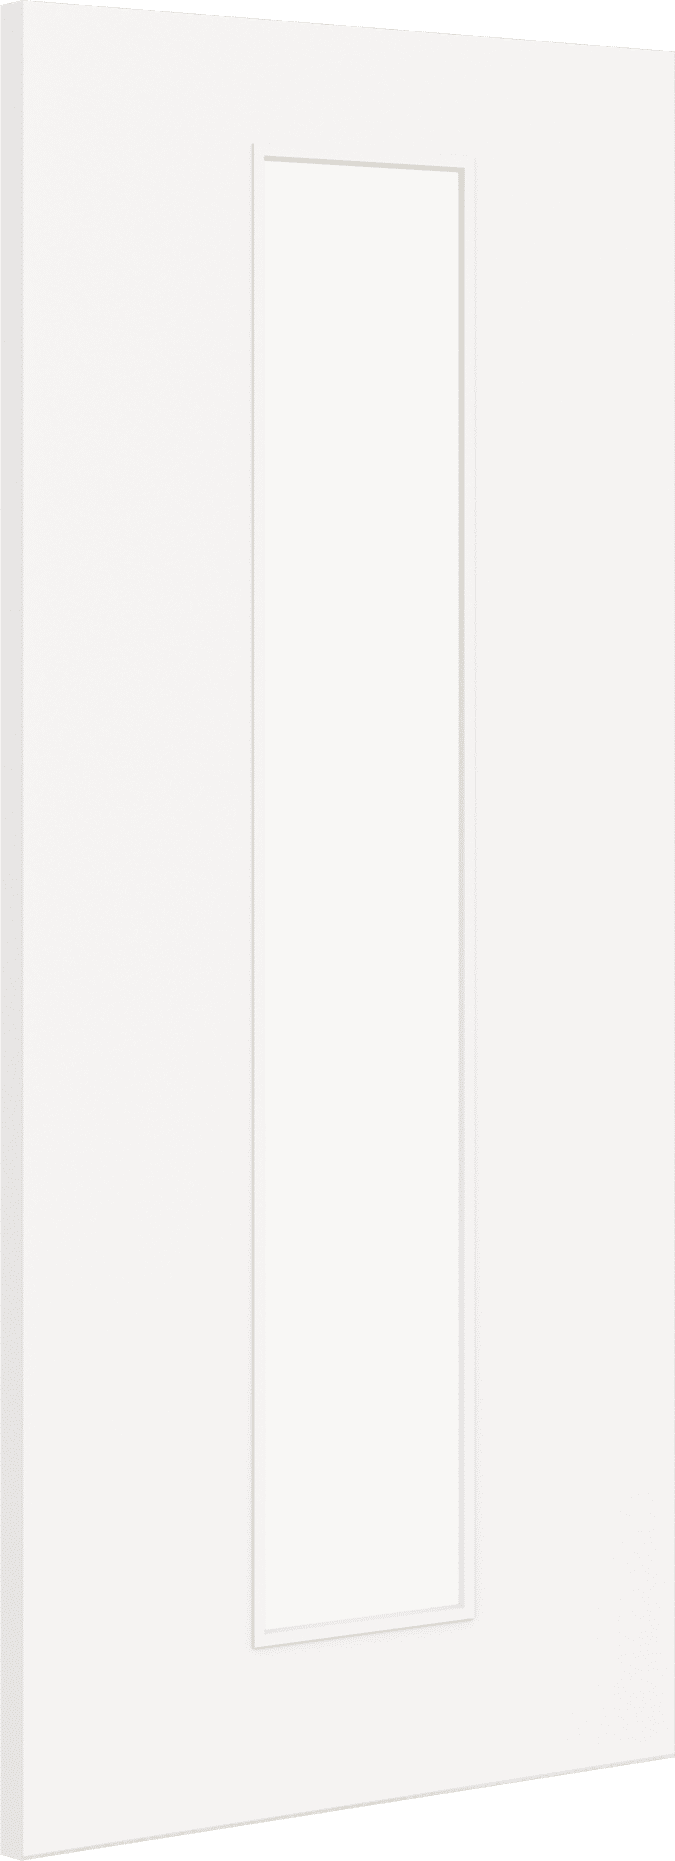 1981mm x 610mm x 44mm (24") Architectural Paint Grade White 10 Frosted Glazed Fire Door Blank